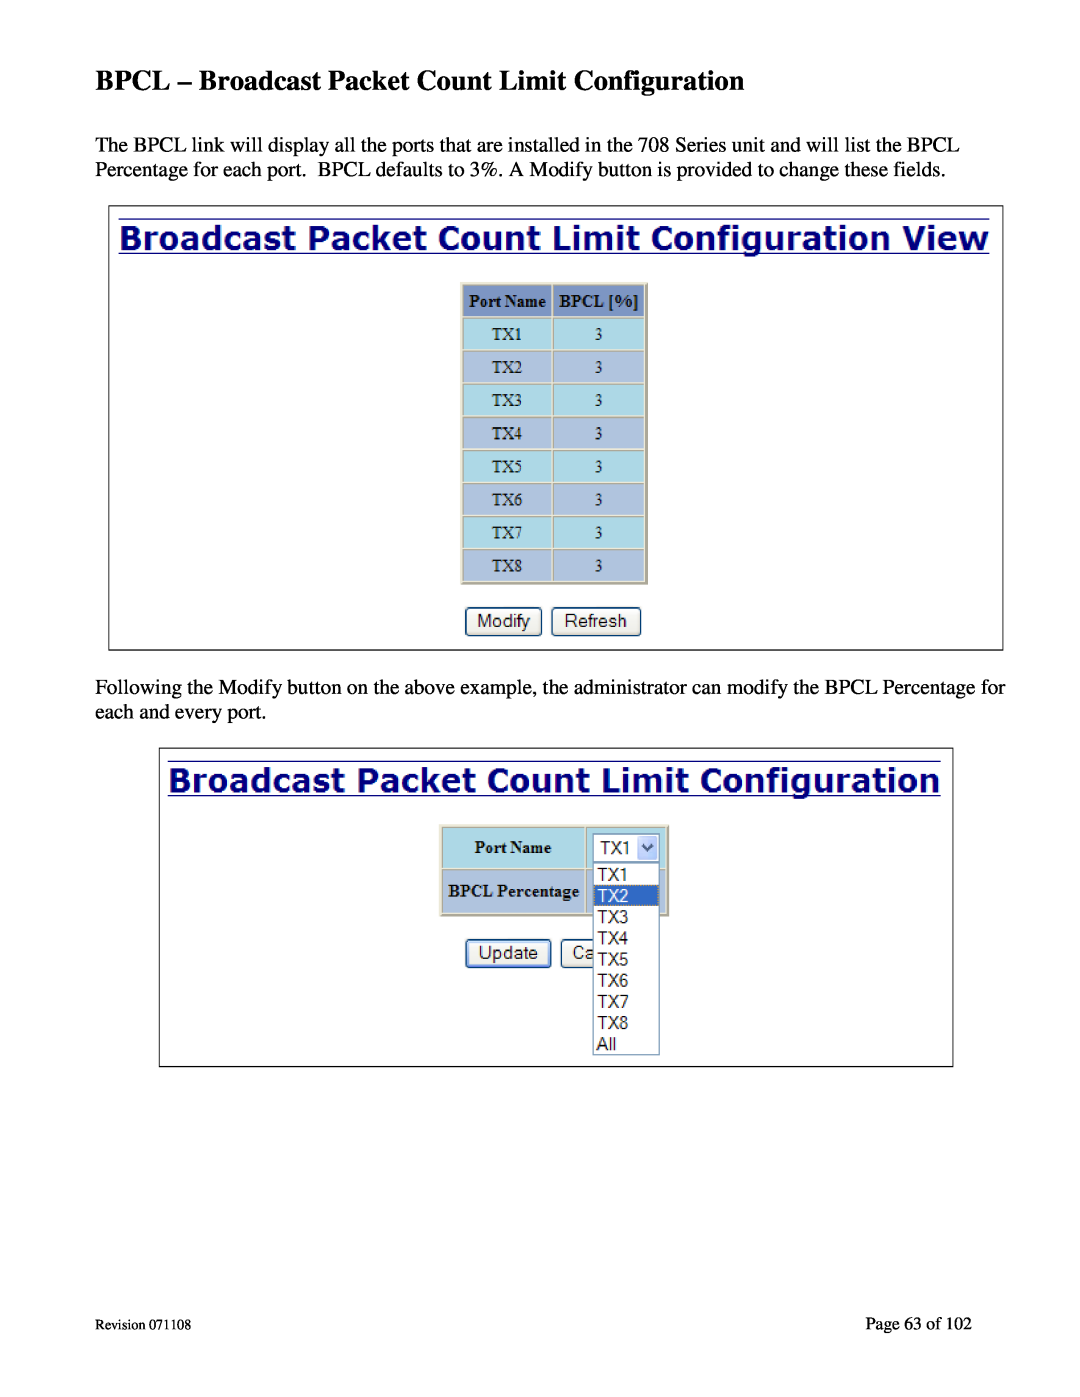 N-Tron 708M12 user manual BPCL - Broadcast Packet Count Limit Configuration, Page 63 of 